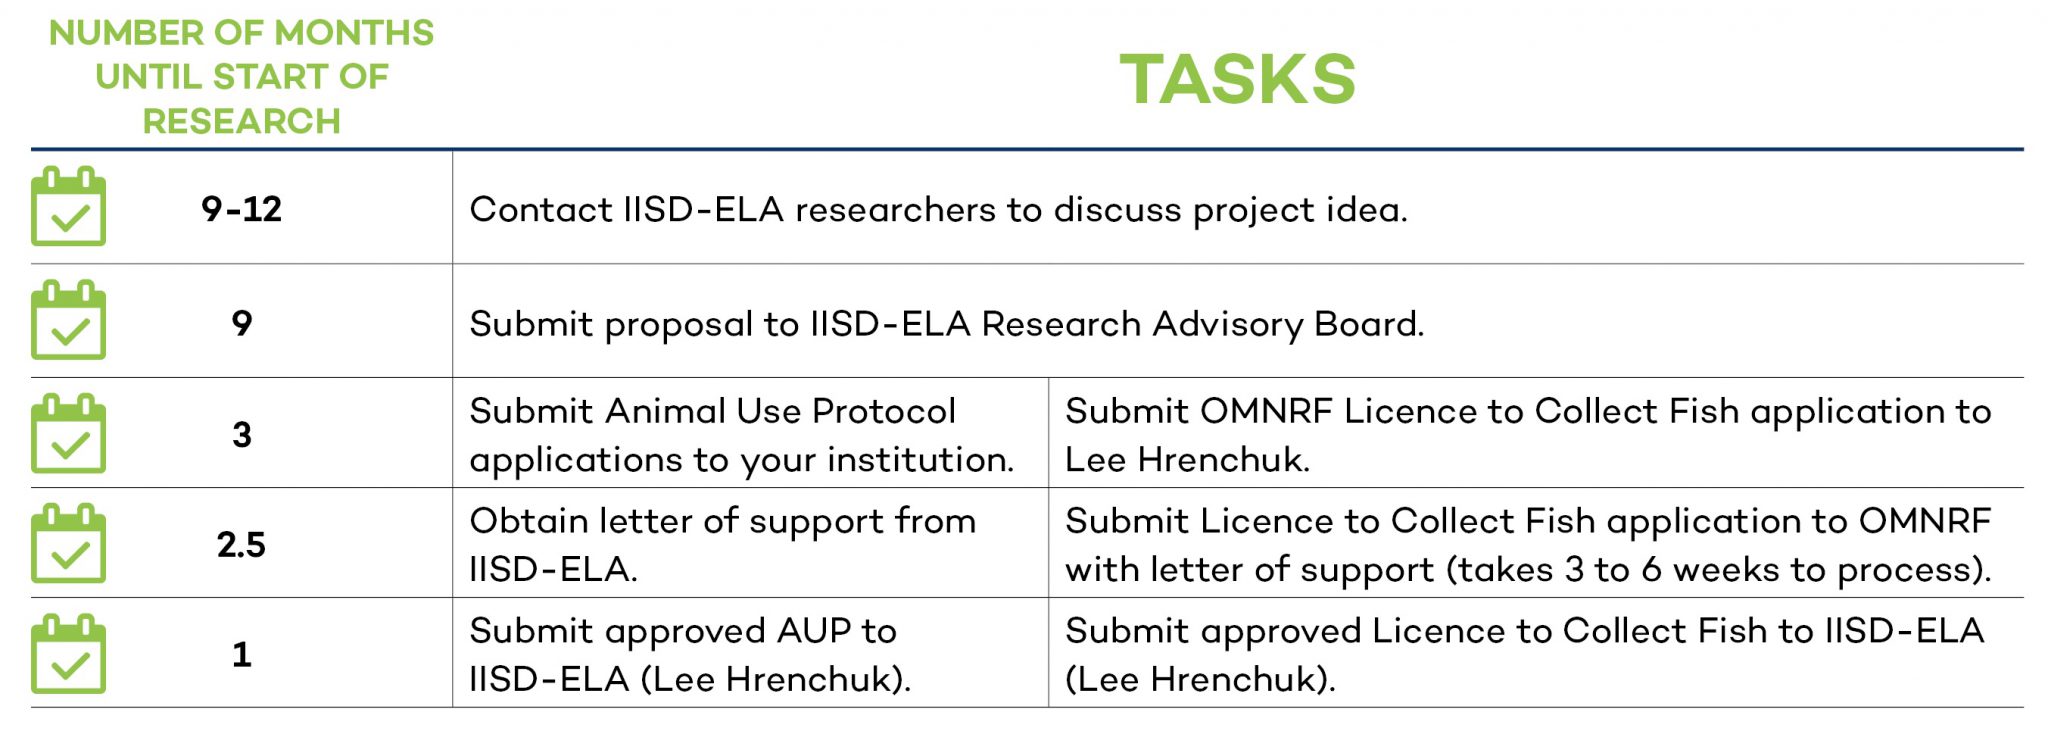 infographic of tasks for applying for research at IISD Experimental Lakes Area in Ontario